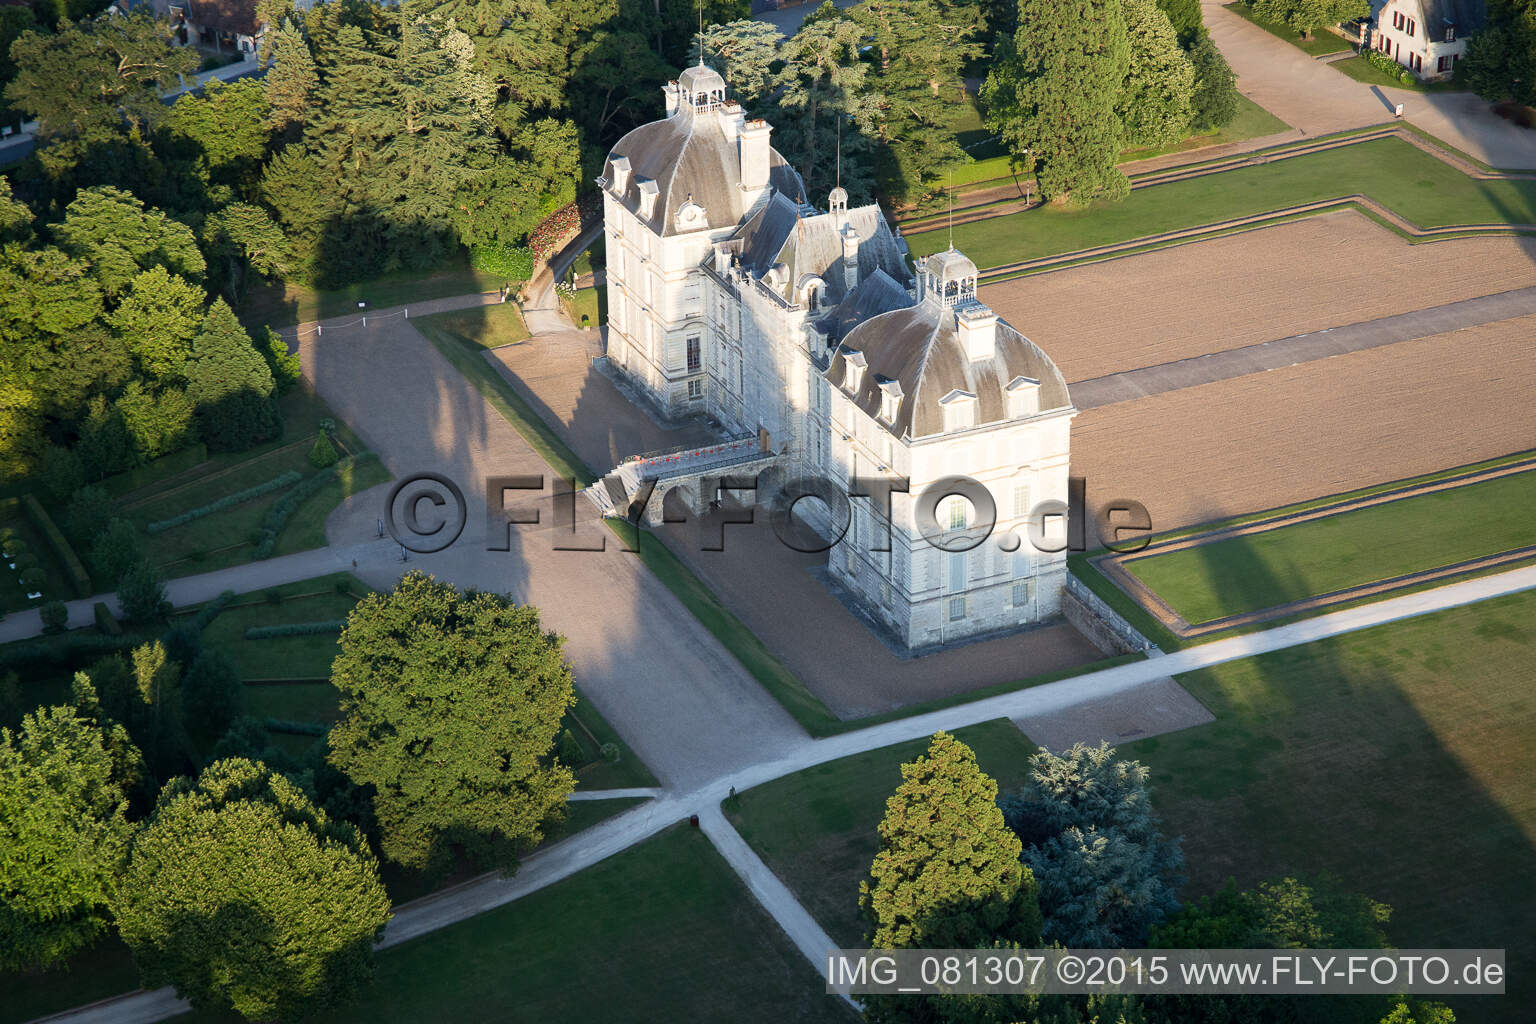 Castle Cheverny - Chateau de Cheverny in Cheverny in Centre-Val de Loire, France from the drone perspective